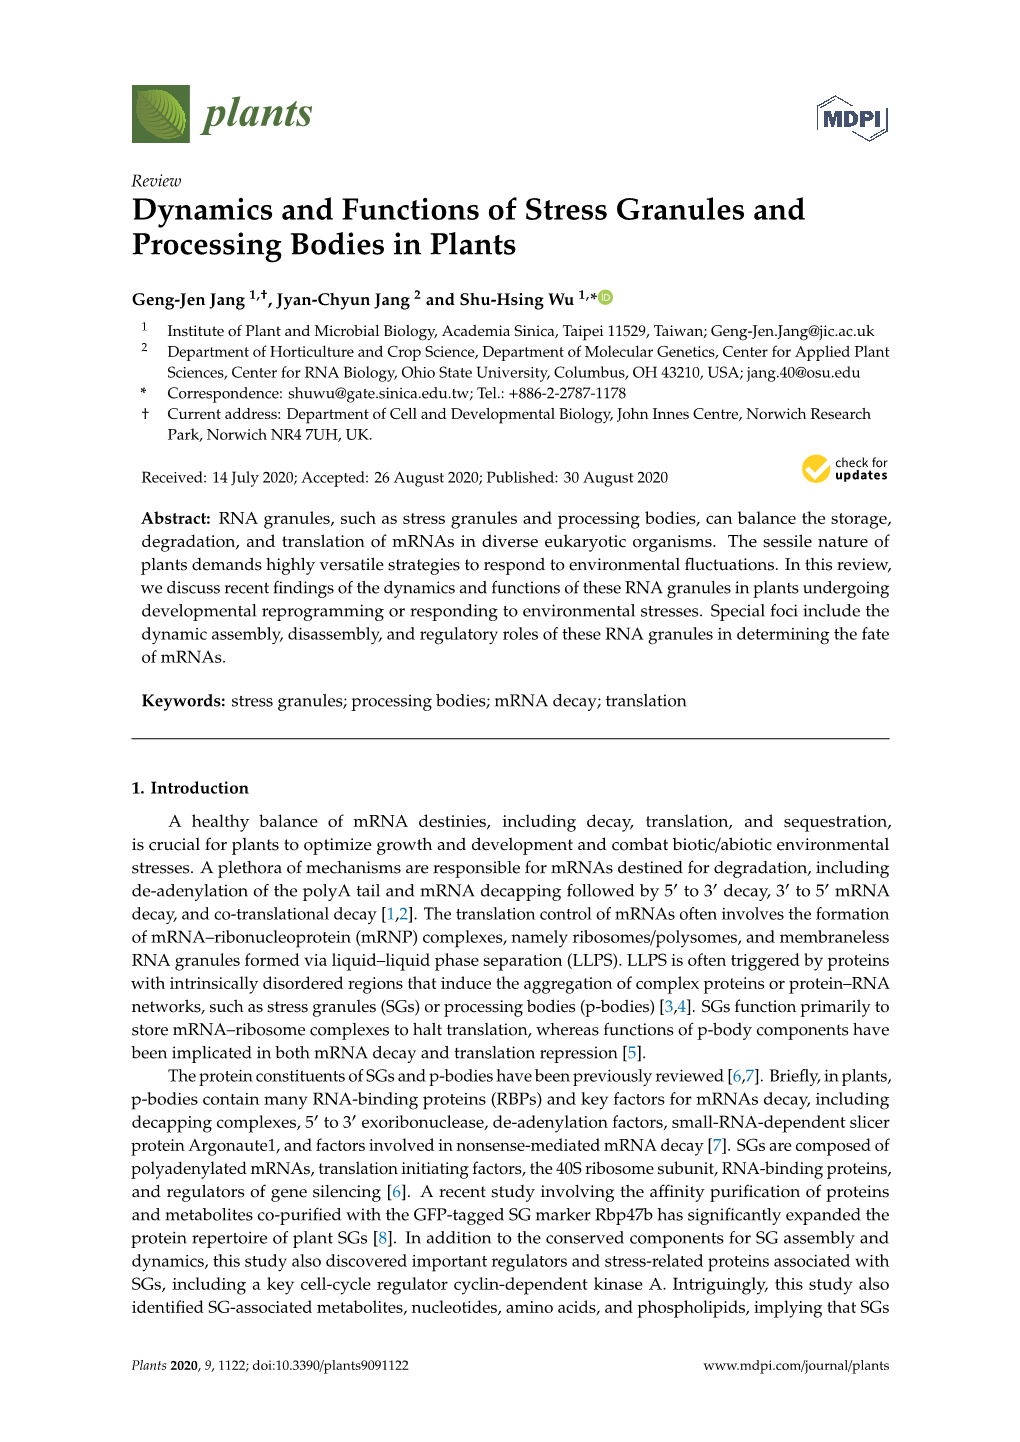 Dynamics and Functions of Stress Granules and Processing Bodies in Plants